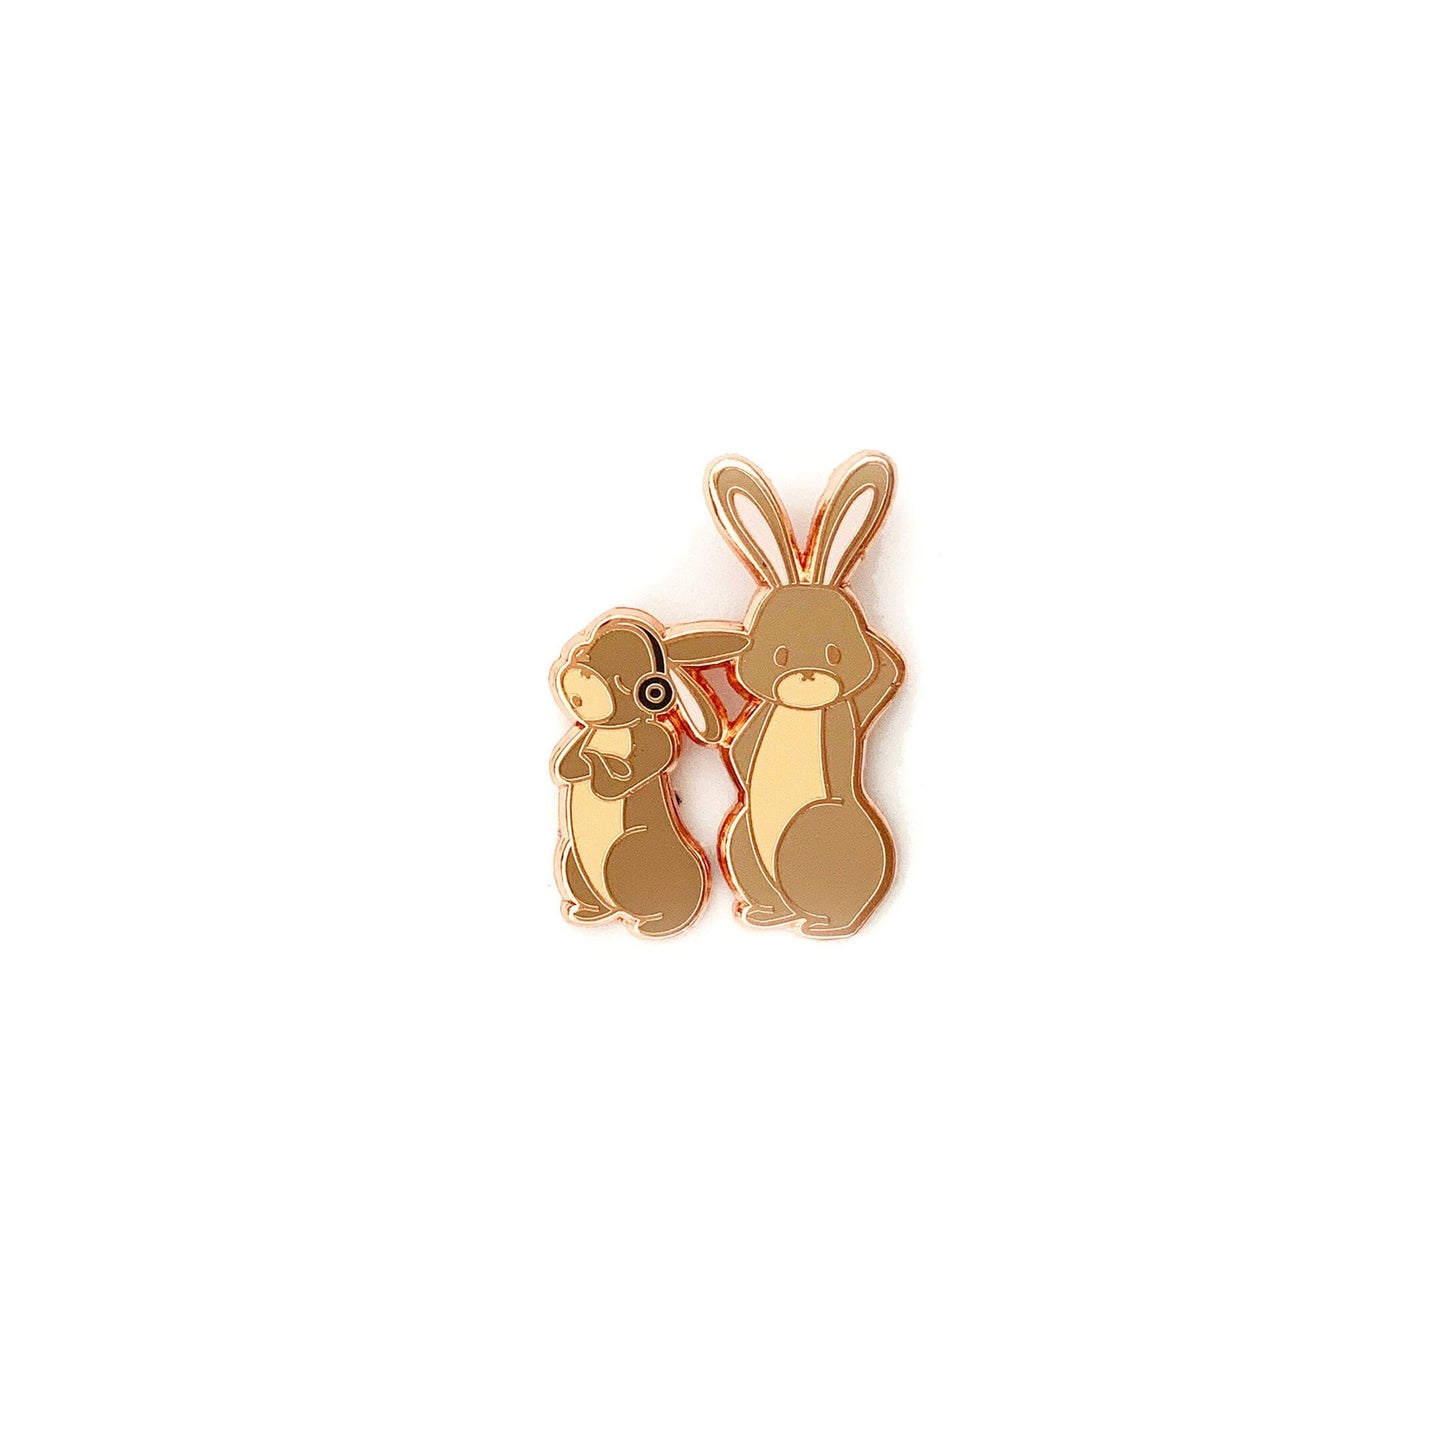 Mother & Baby Bunny - Enamel Pin Set of 5, Mother’s Day Gift, Pins, Brooches & Lapel Pins